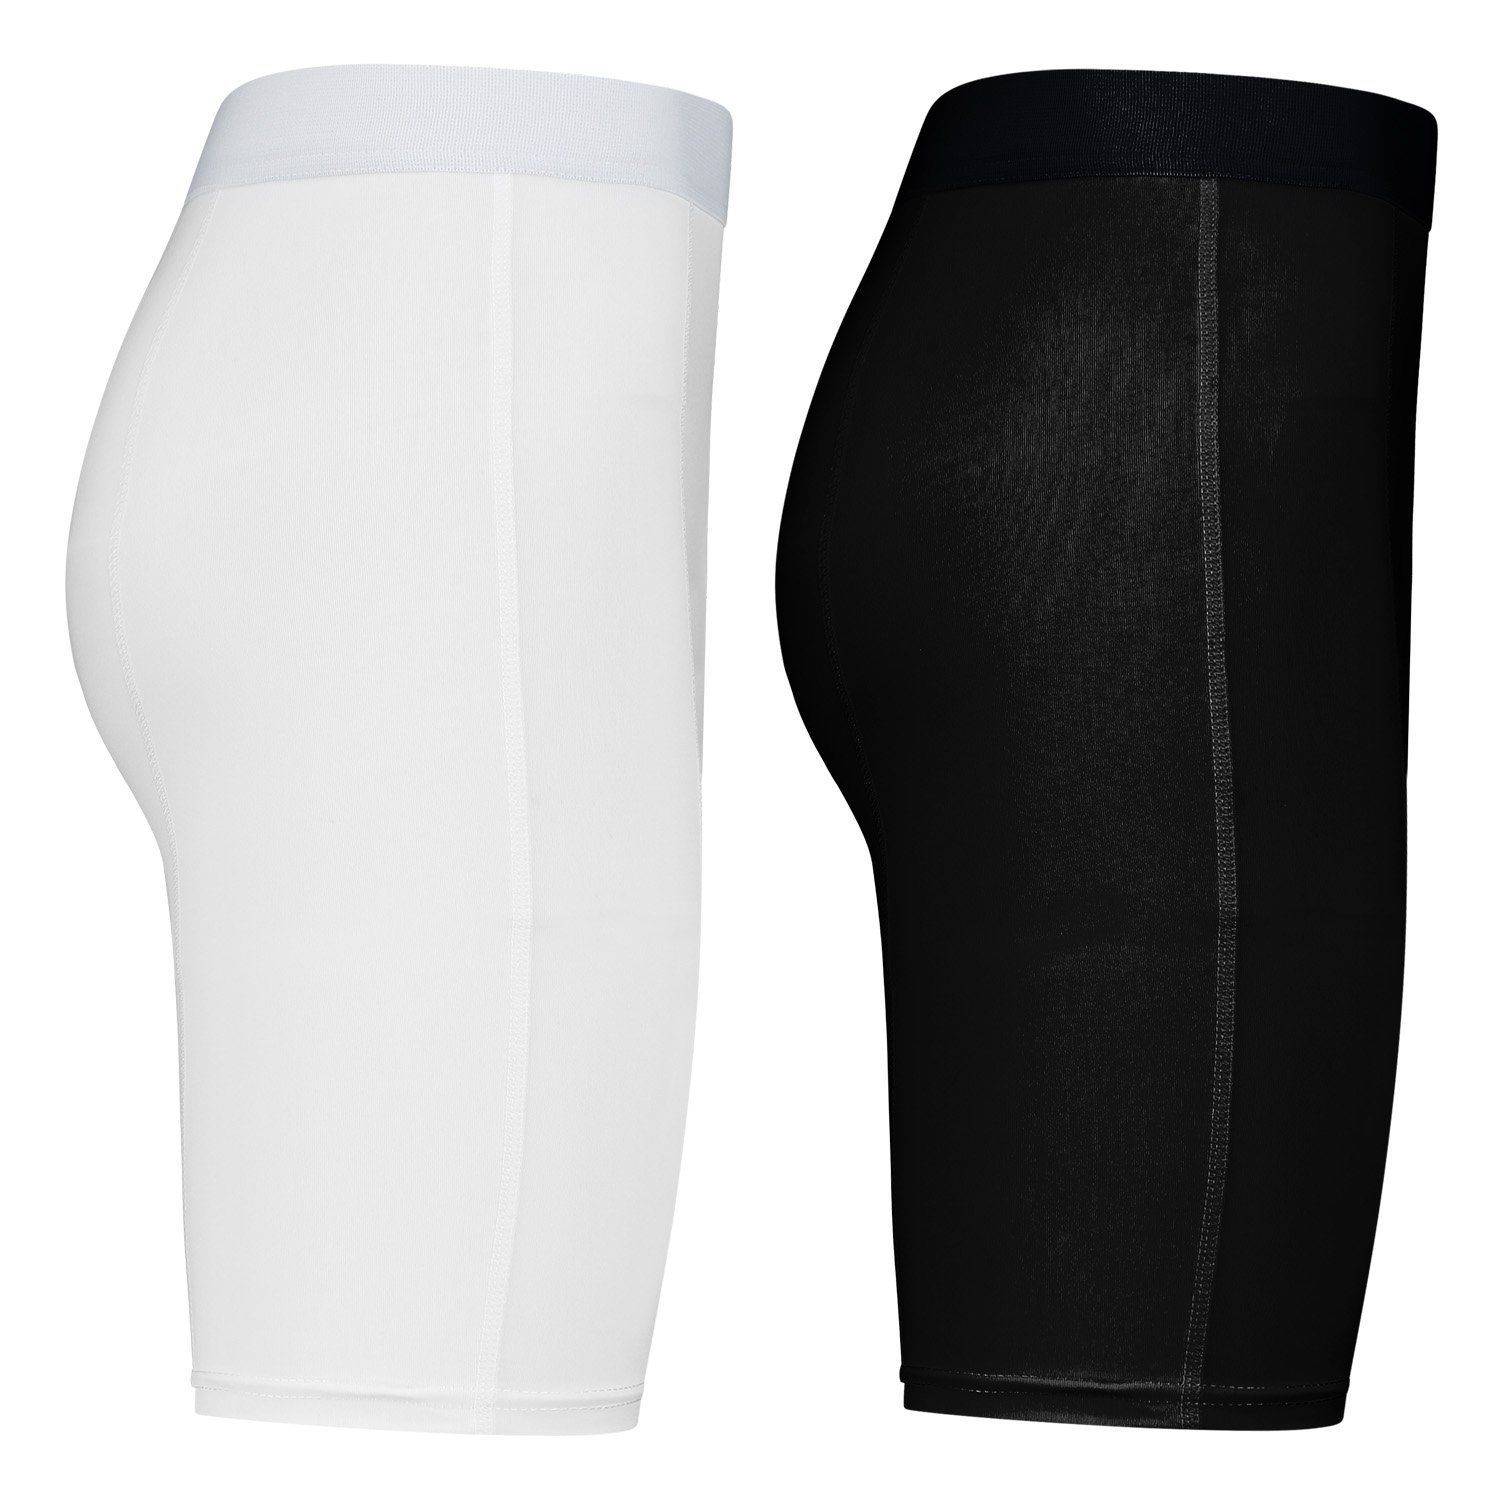 gladiator sports womens compression shorts in black and white side view